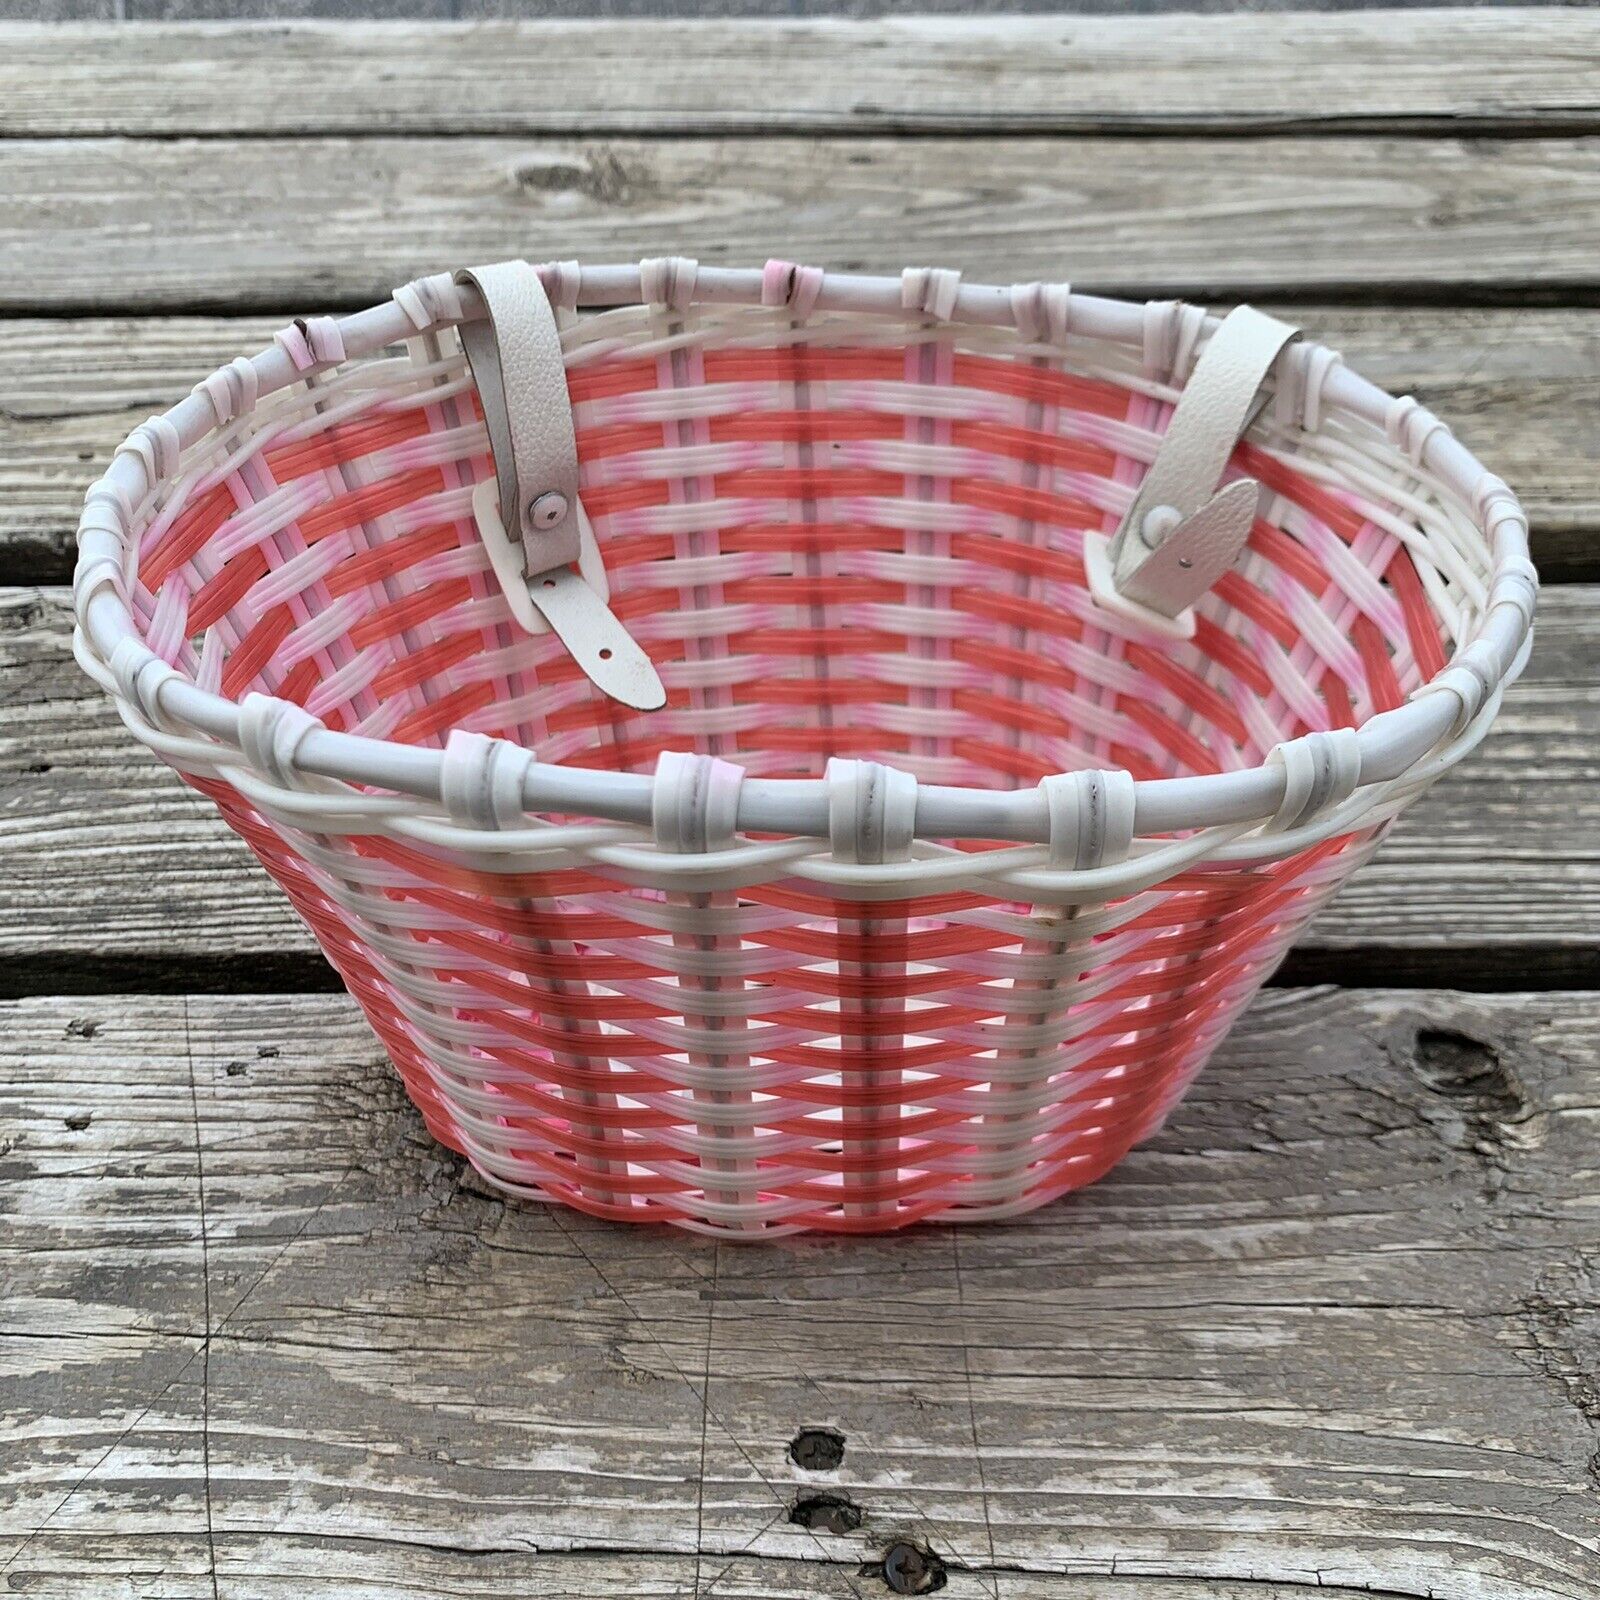 BICYCLE BASKET WITH LEATHER STRAPS BUCKLES PINK & RED NOS